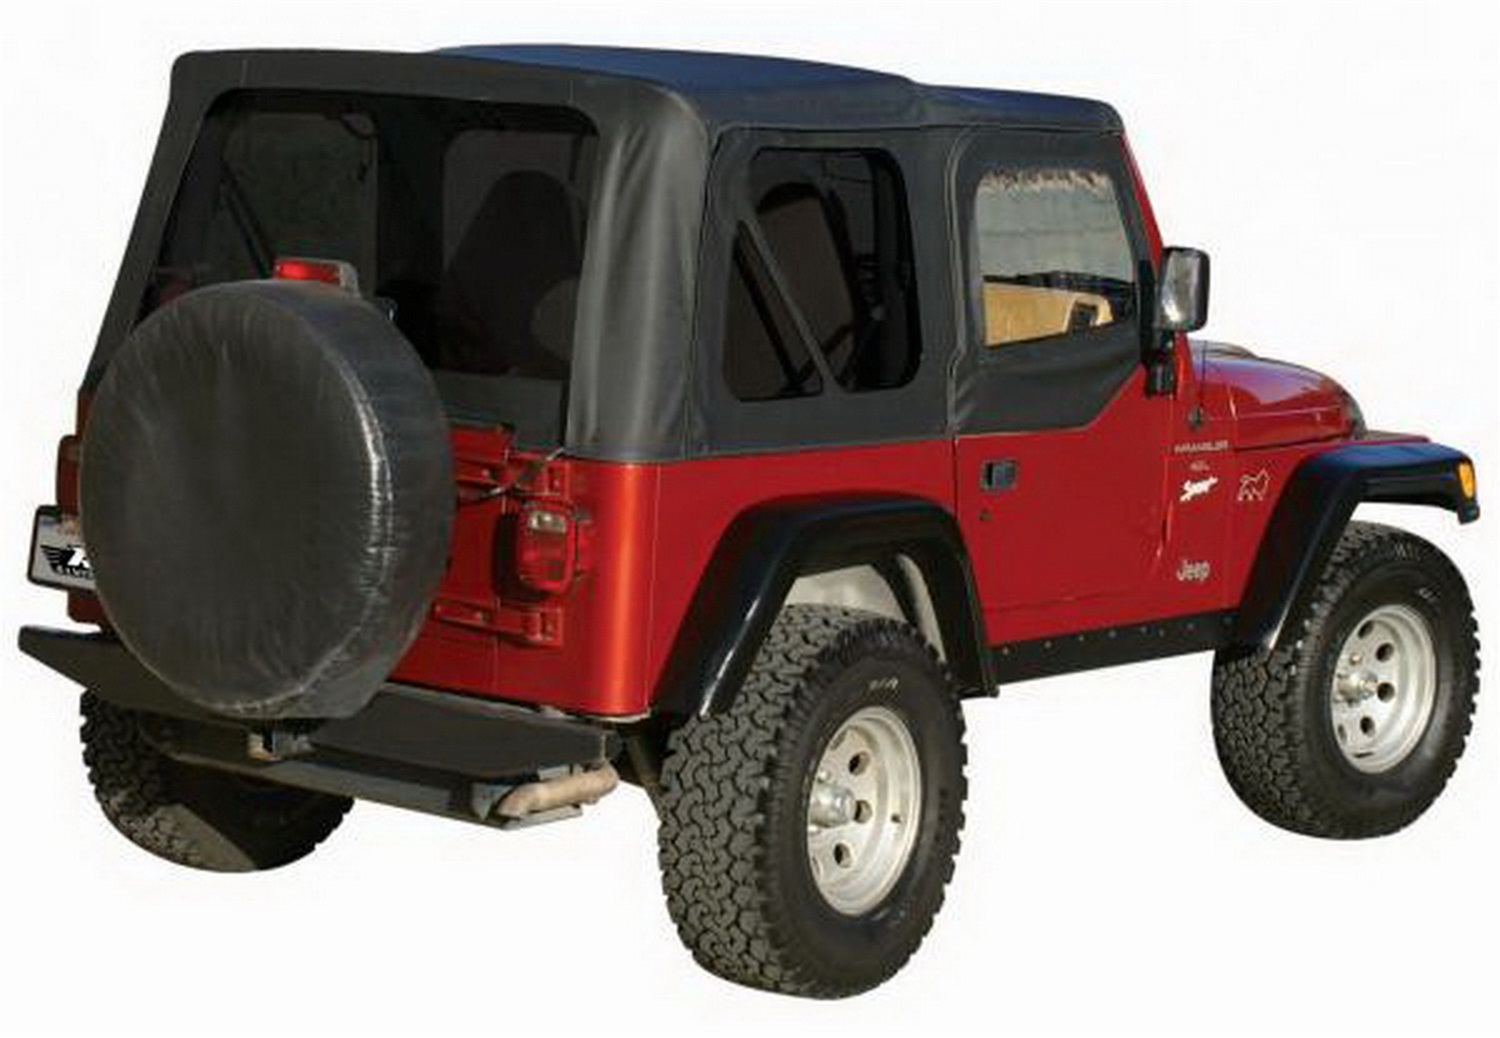 Rampage Rampage 99735 Factory Replacement Soft Top Fits 97-06 Wrangler (TJ)